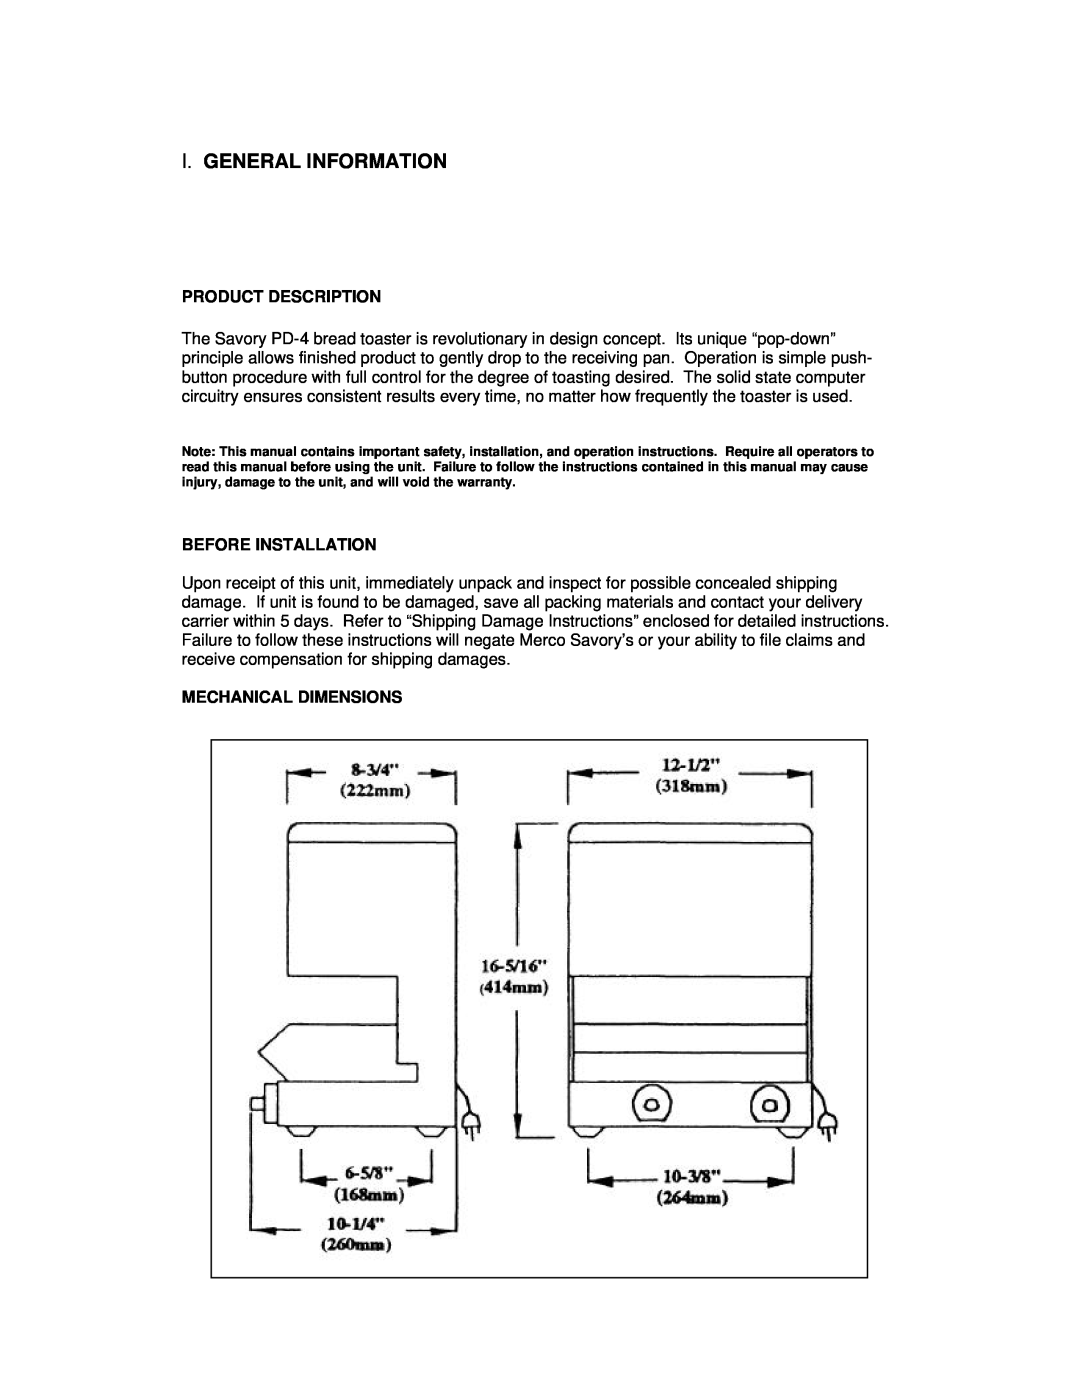 Merco Savory PD-4 instruction manual I.General Information, Product Description, Before Installation, Mechanical Dimensions 